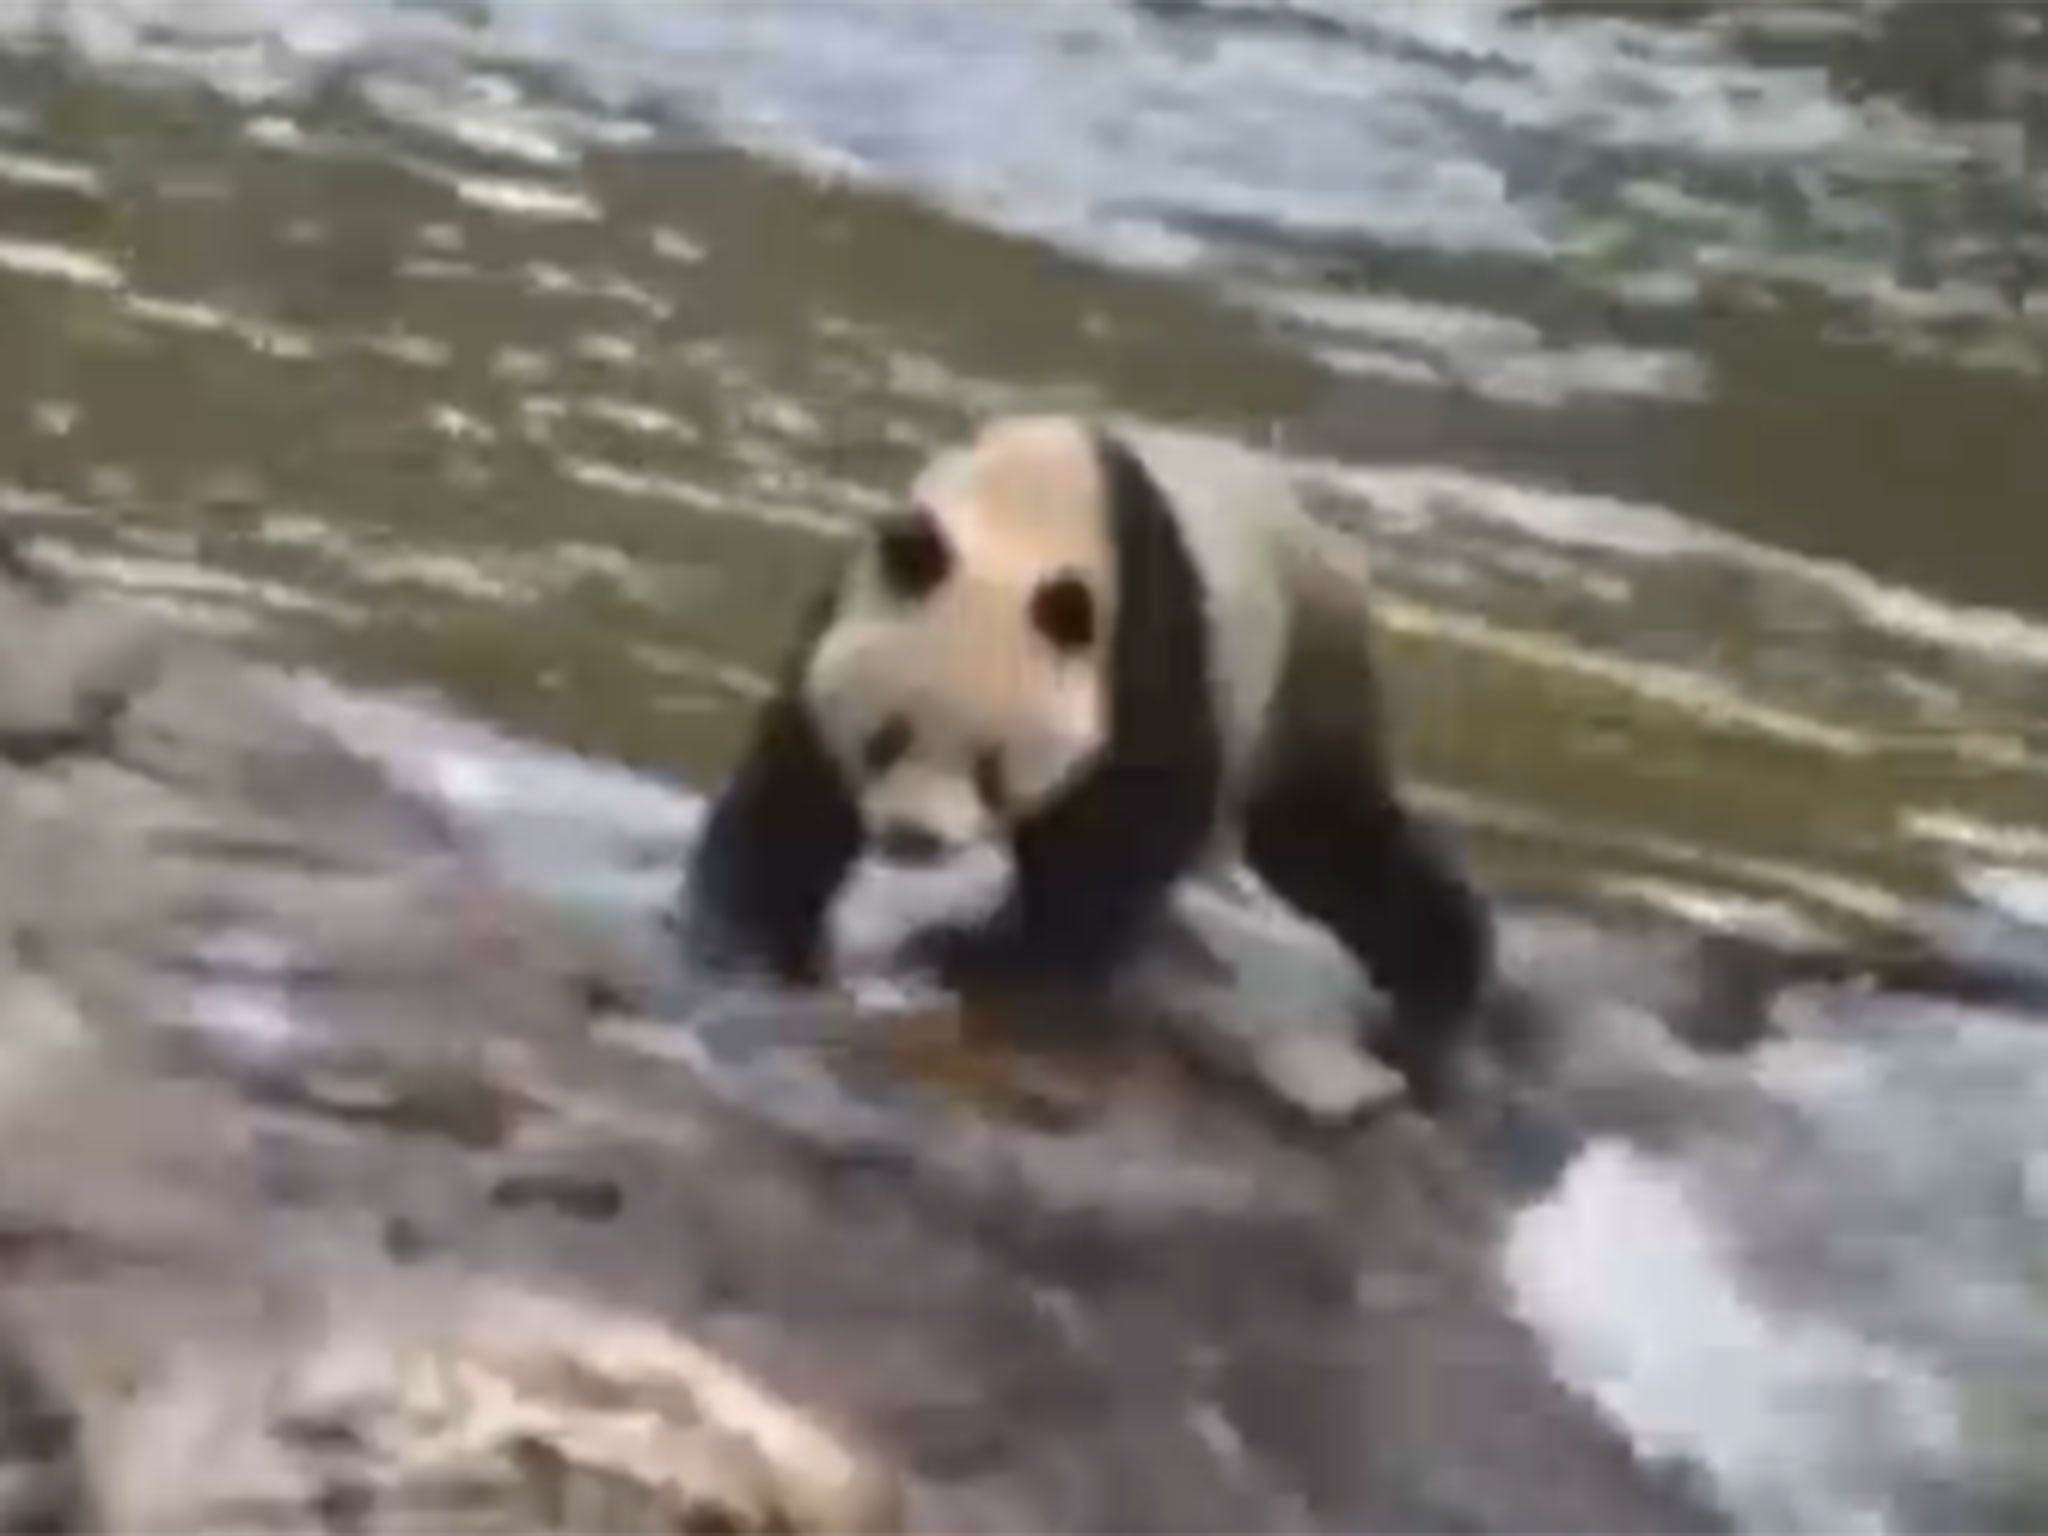 Tourists in the Qinling mountains spotted the endangered species in a creek